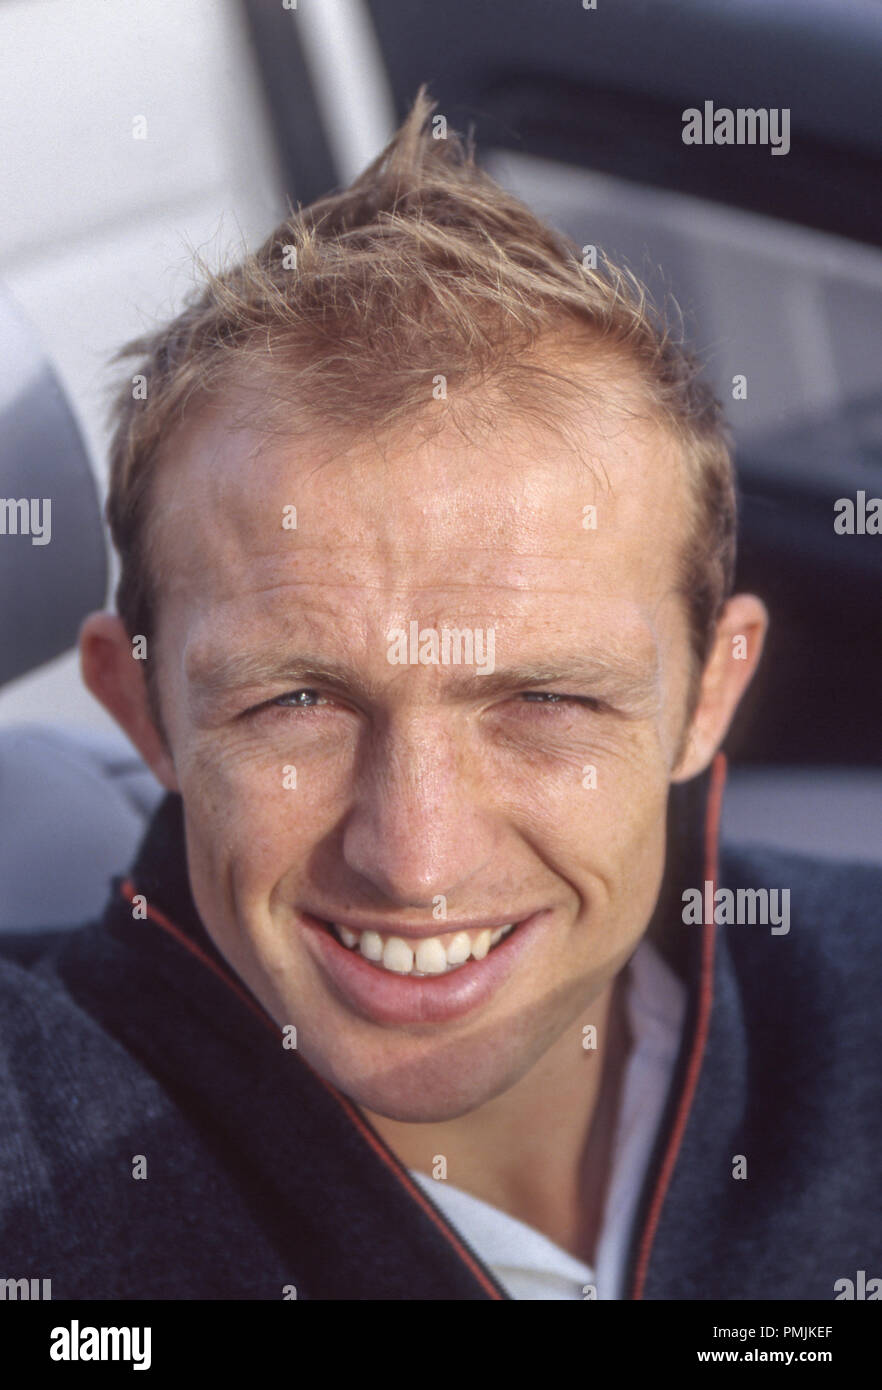 Former England Rugby captain Matt Dawson sits in the driving seat of a car Stock Photo